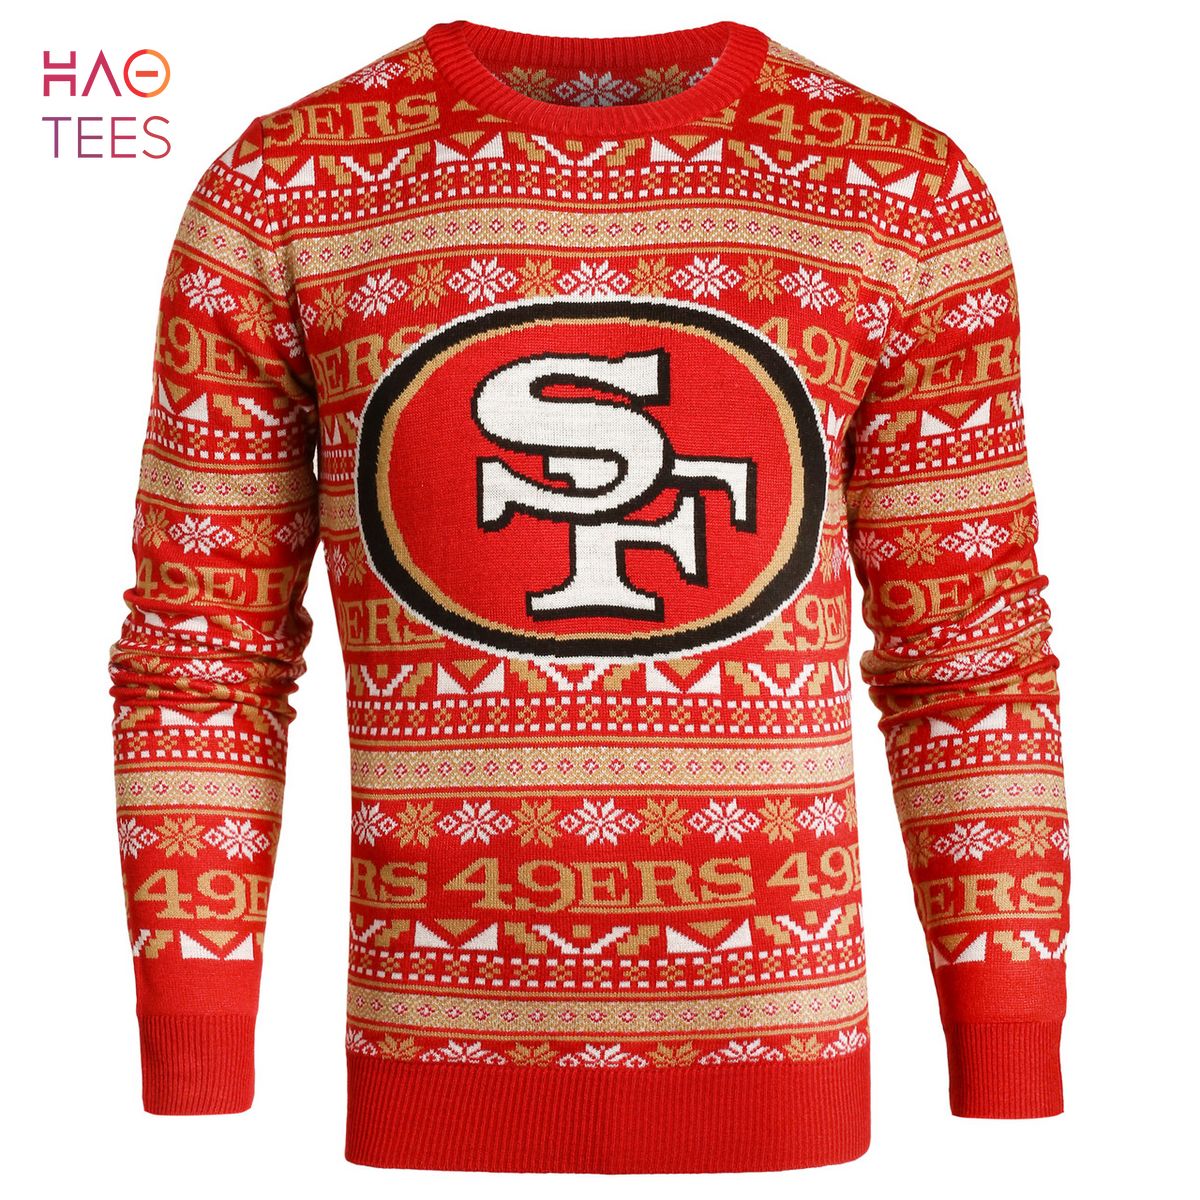 BEST San Francisco 49ers Aztec Print Ugly Crew Neck Sweater SMALL